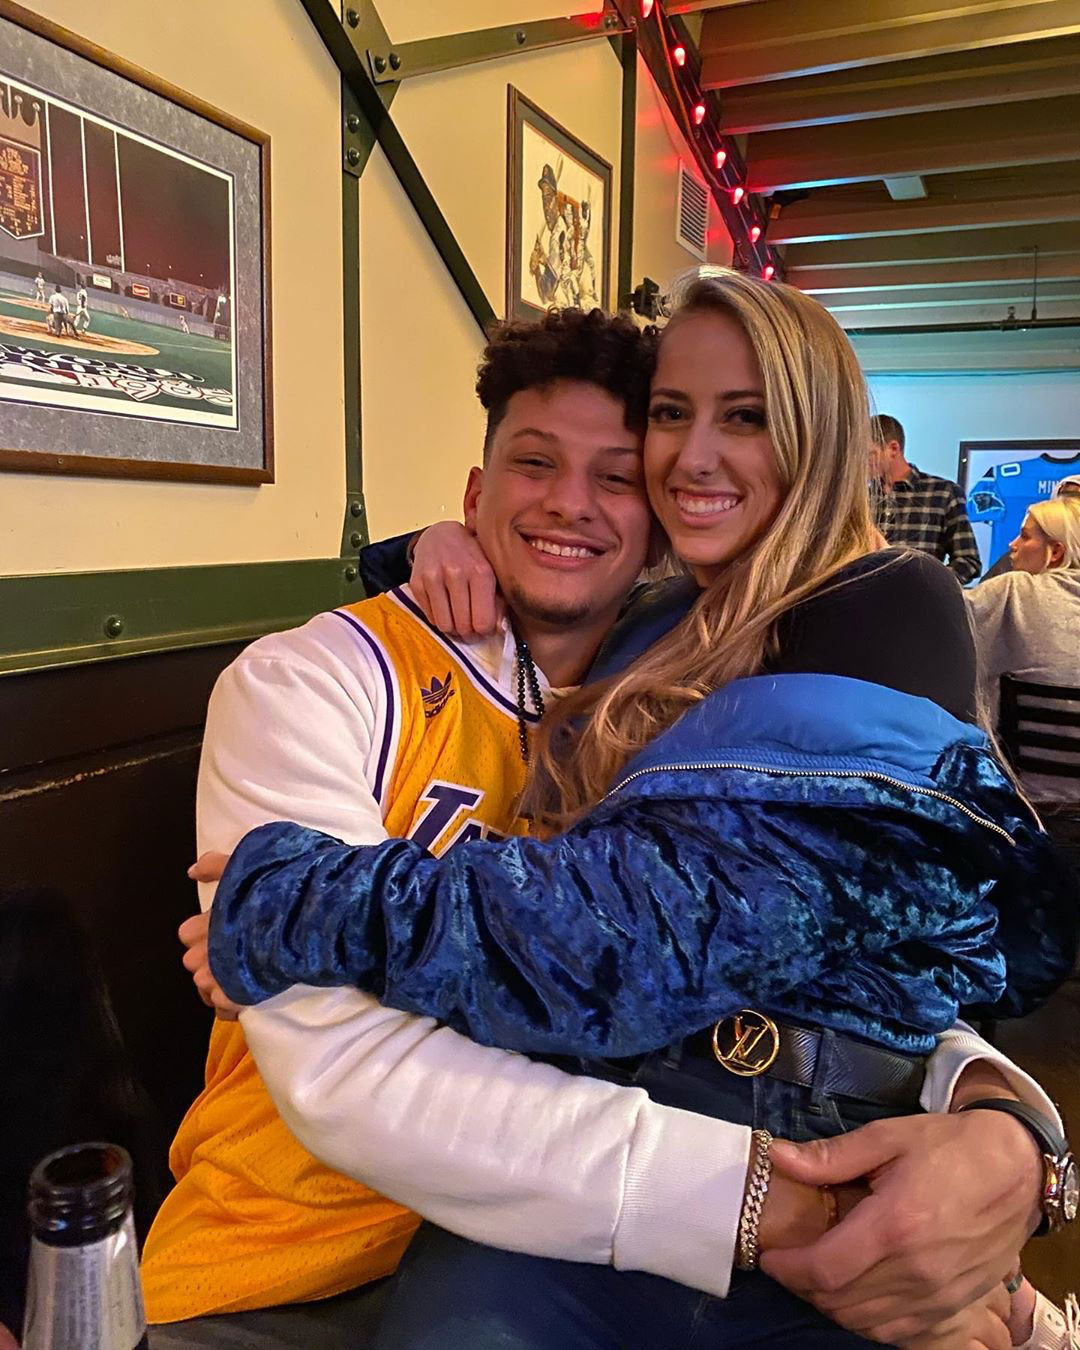 Patrick Mahomes, fiancee Brittany Matthews are waiting to release